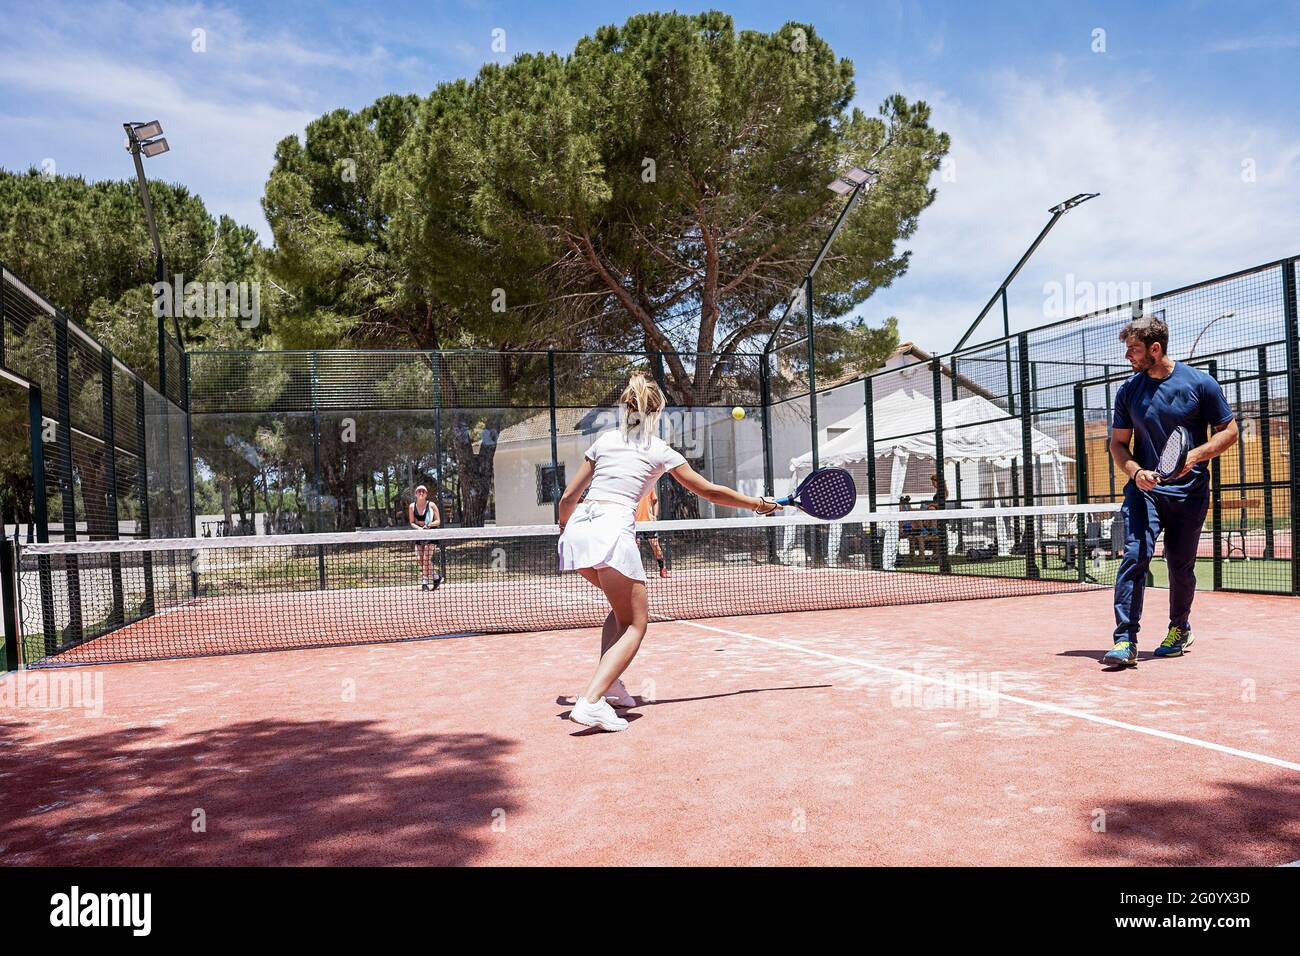 padel tennis players play on an outdoor court in a sunny day Stock Photo